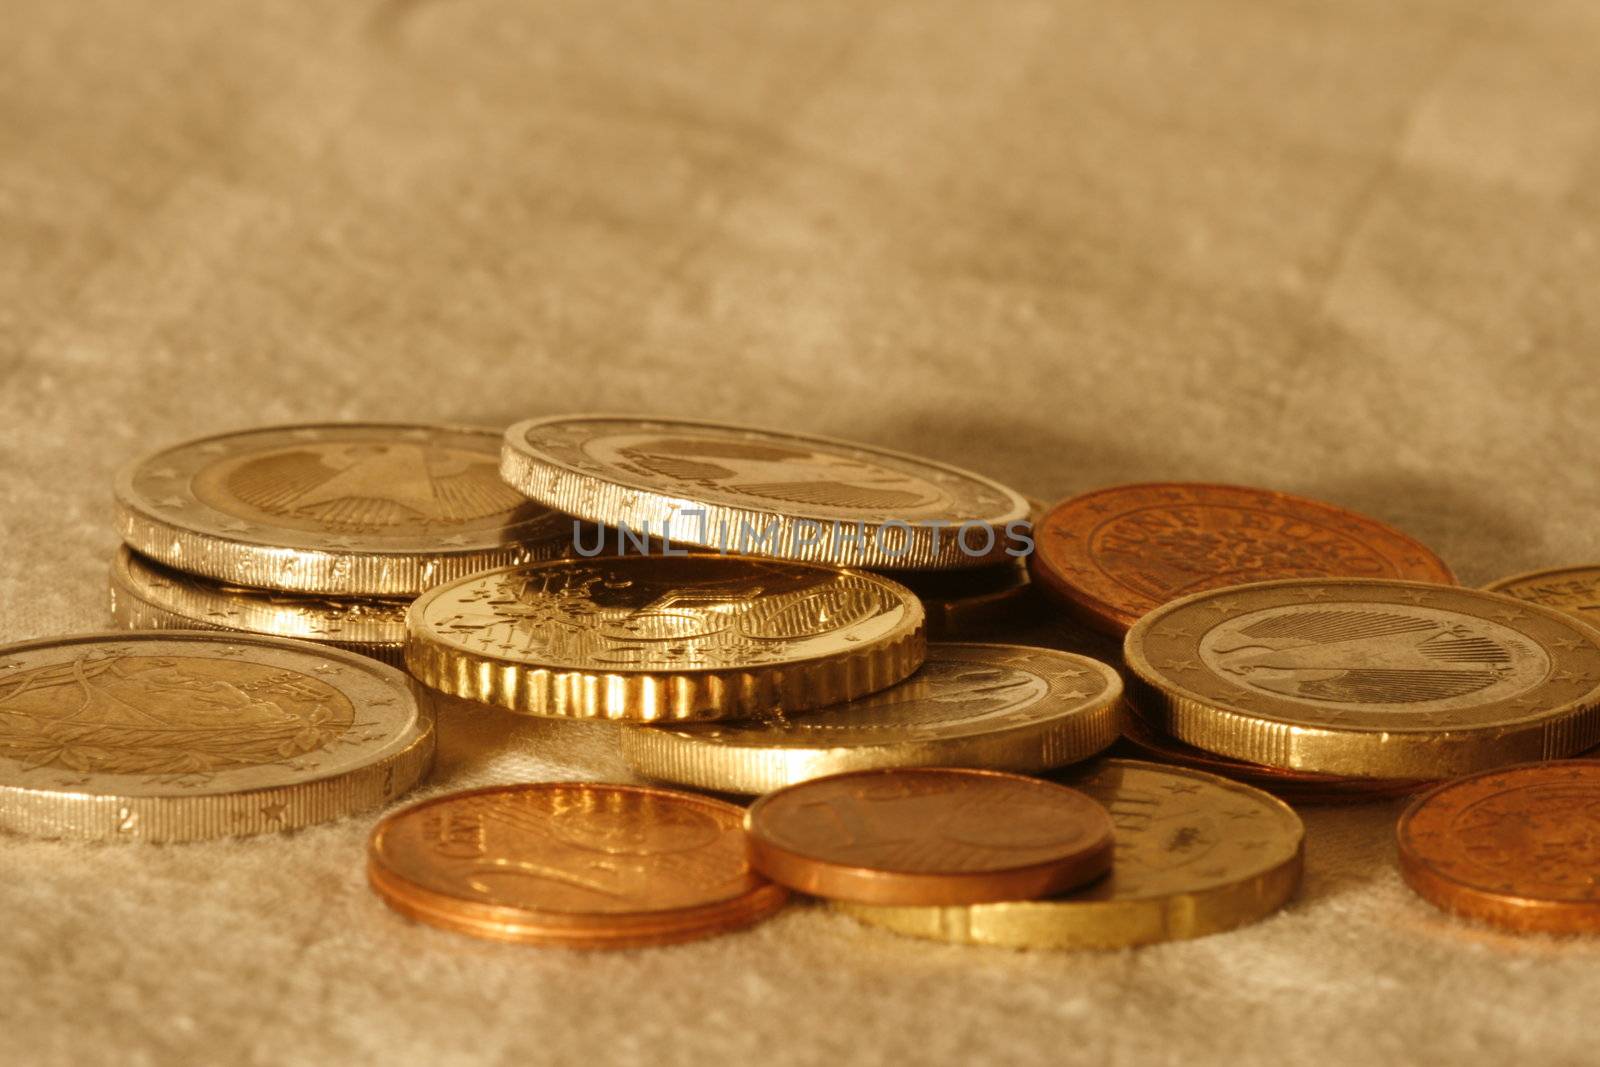 Euromoney; coins on a table